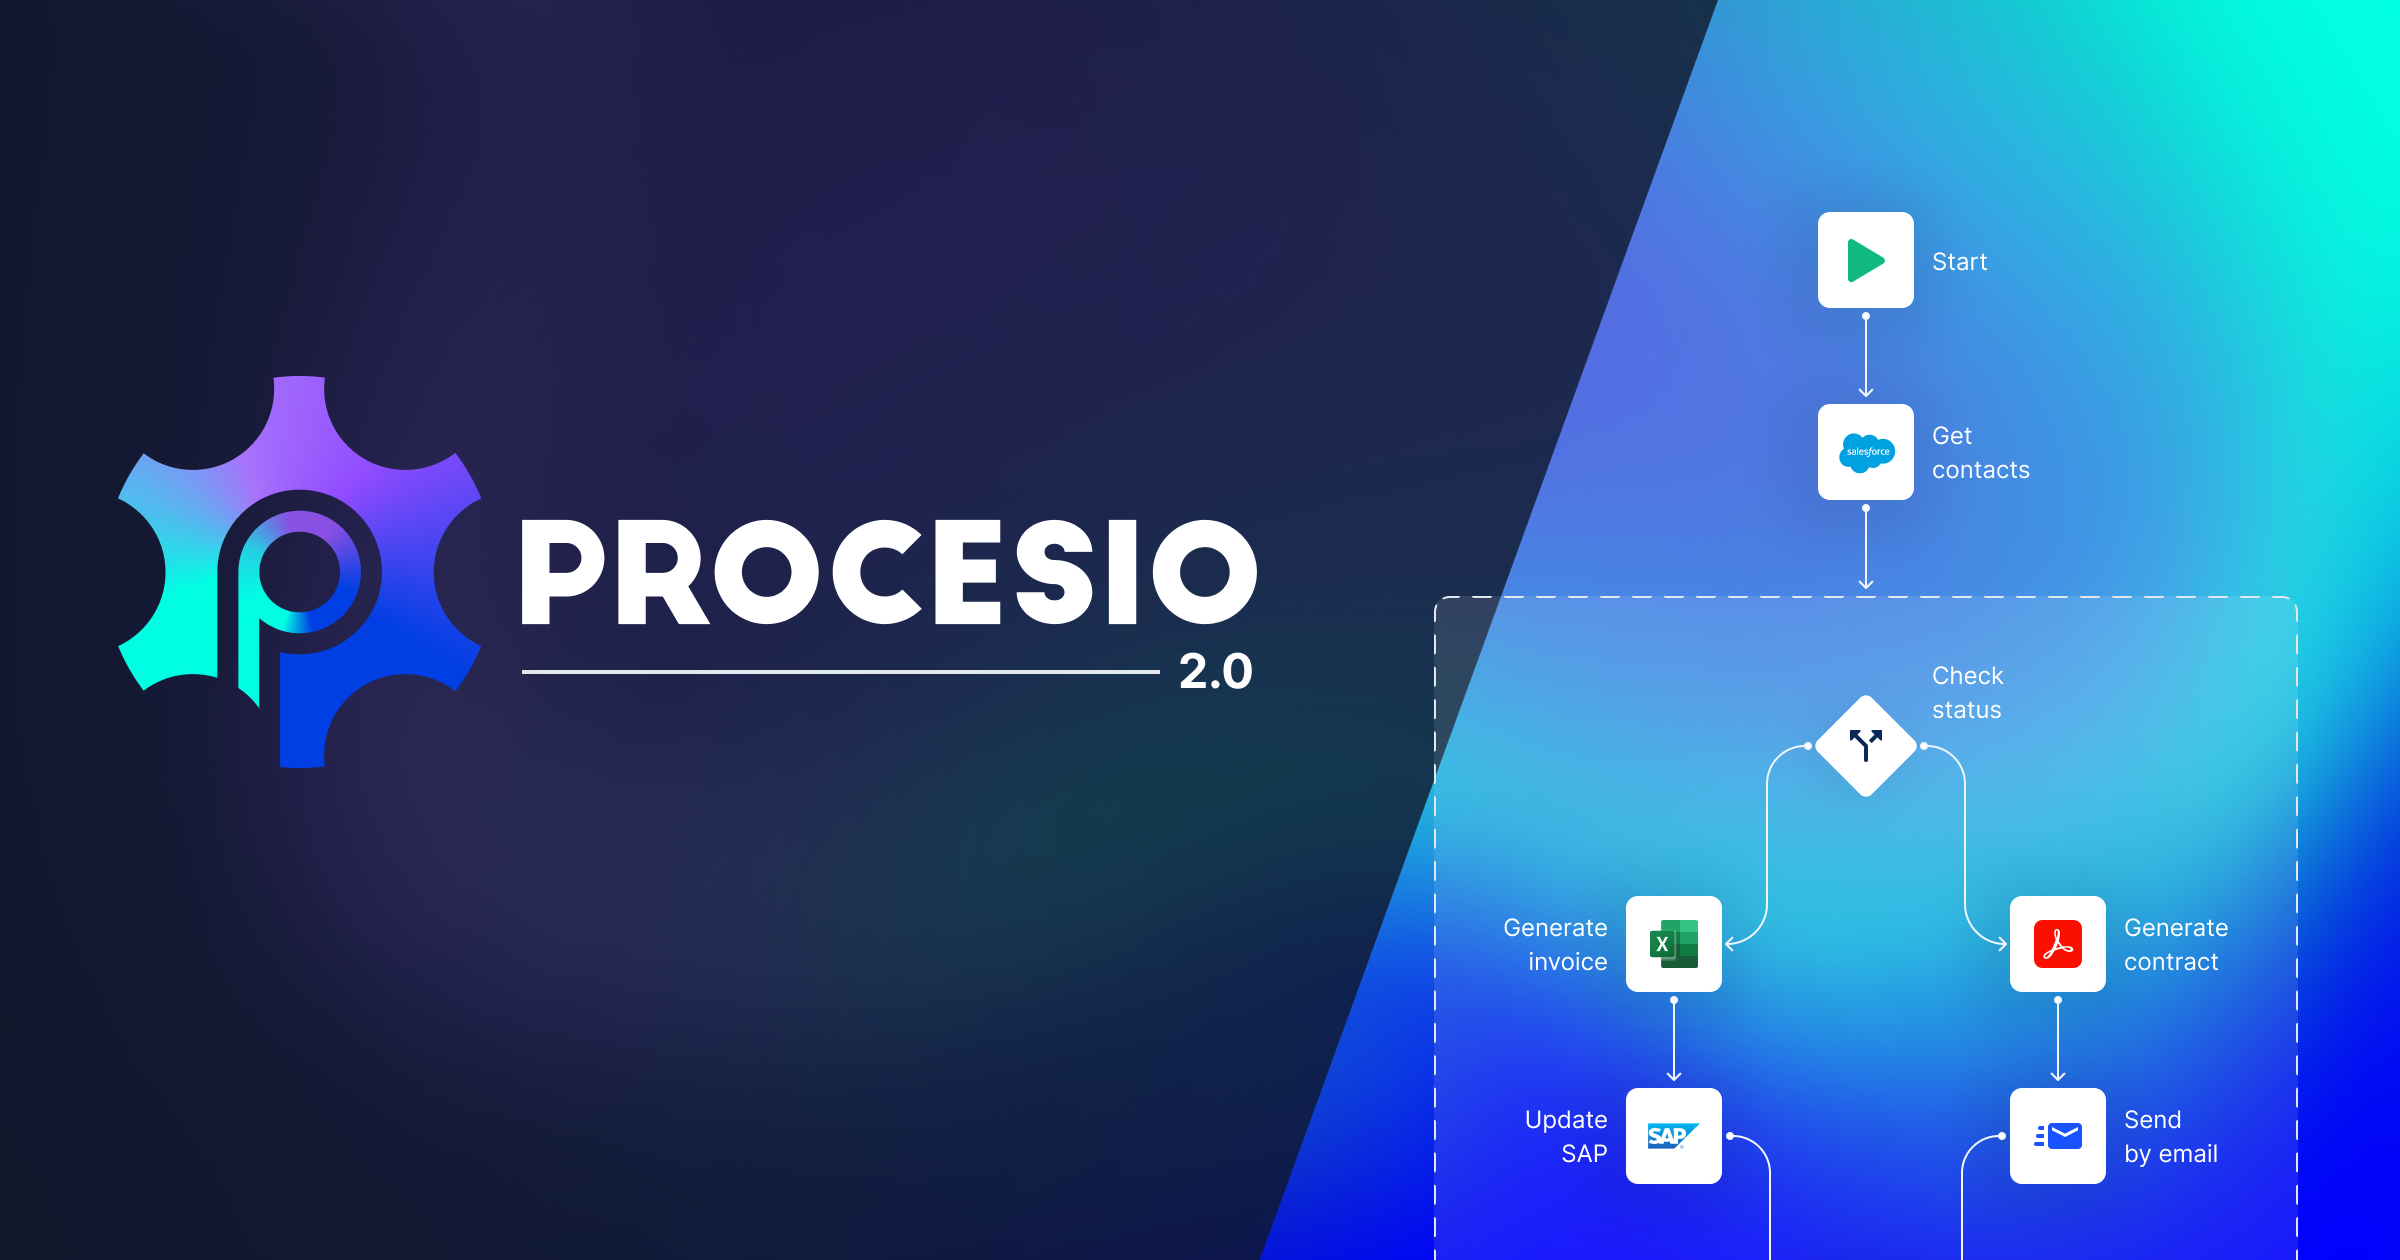 PROCESIO 2.0 is here! Don't miss out our new features